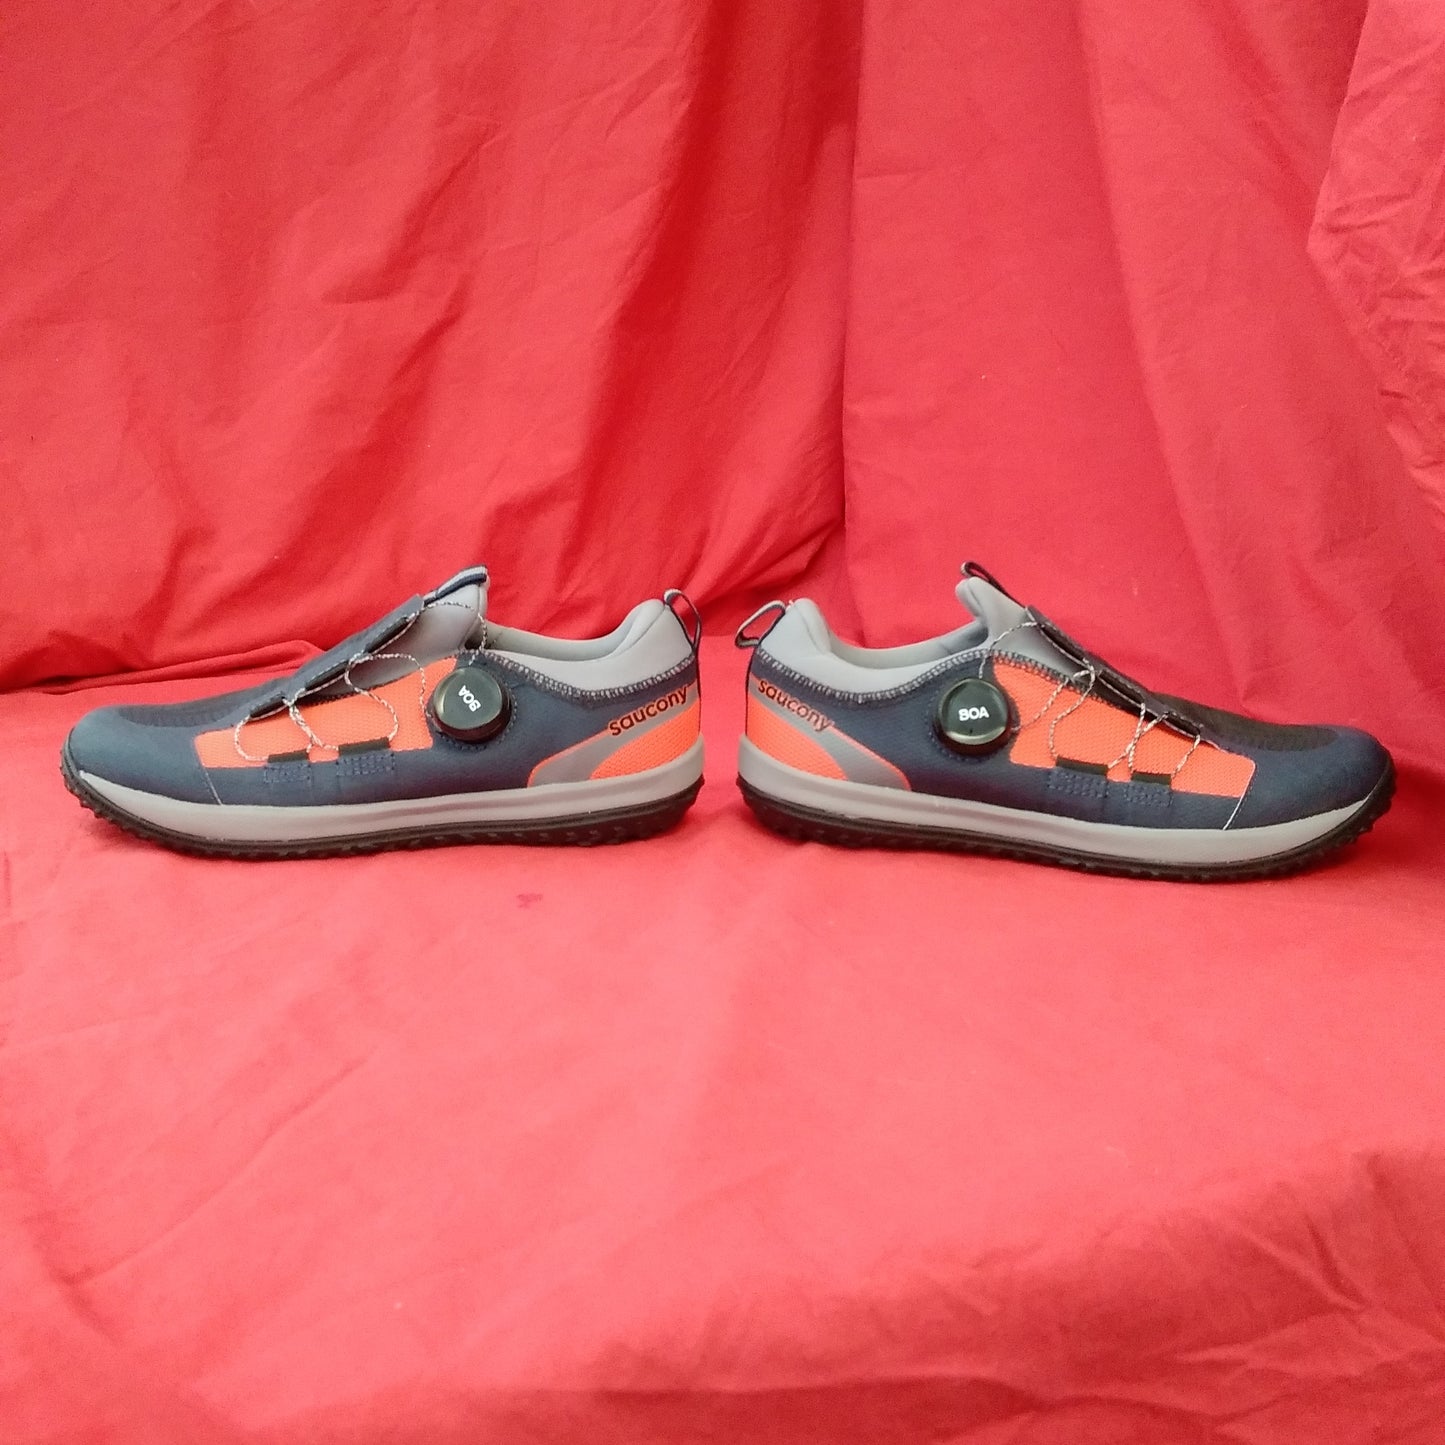 NWOB - Saucony Women's Navy and Orange Switchback 2.0 Shoes - Size: 5W